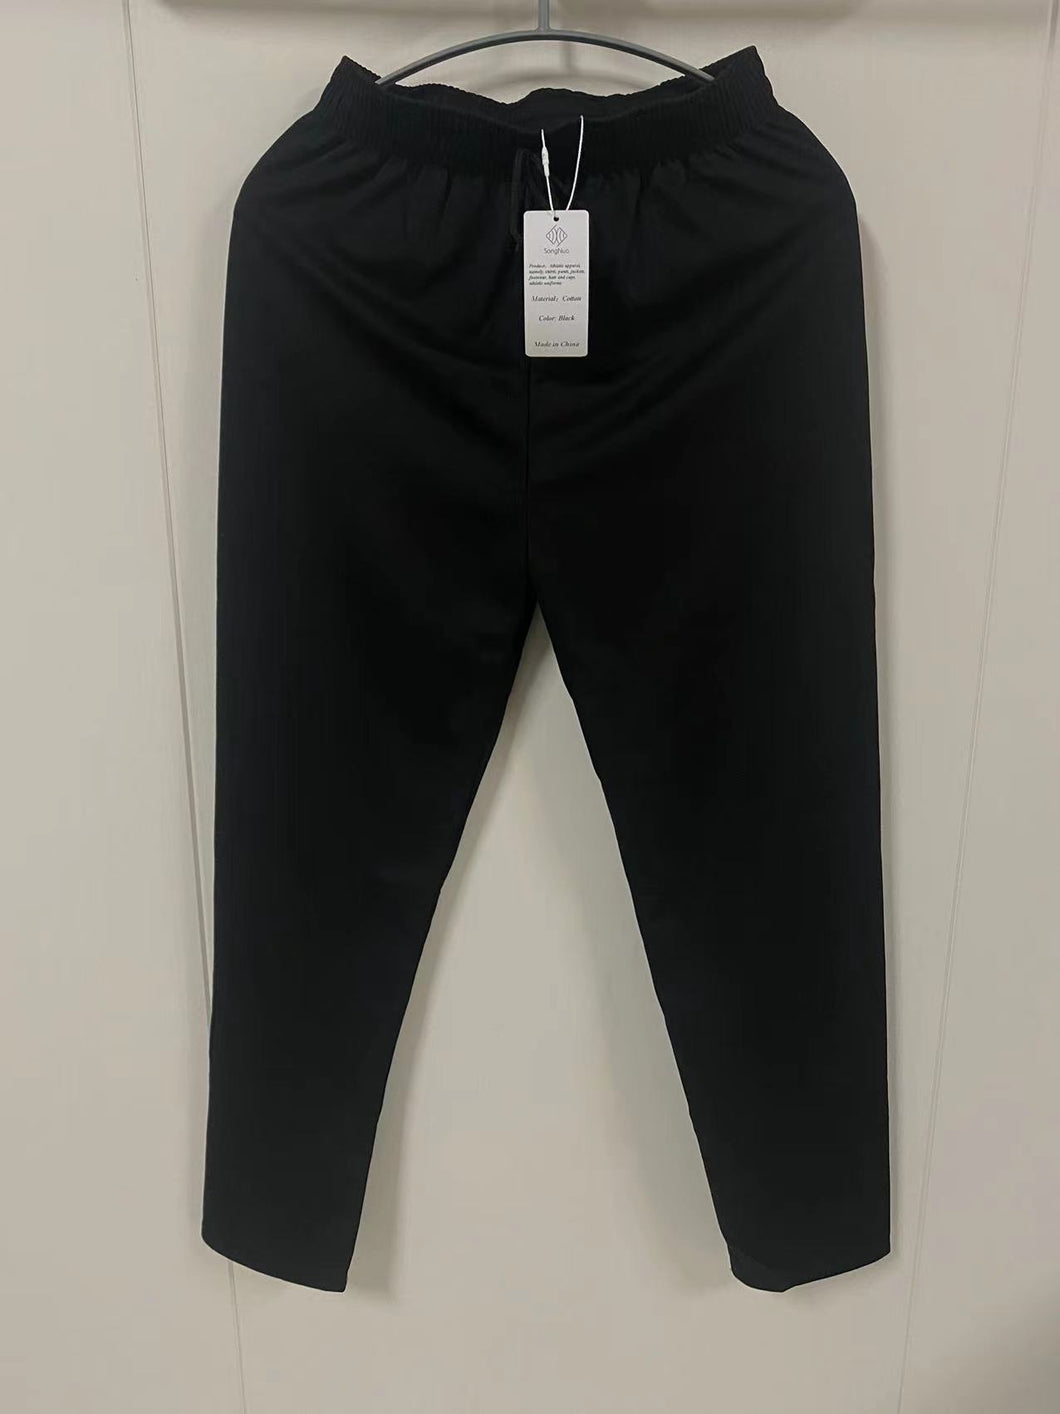 SongNuo Athletic apparel, namely, shirts, pants, jackets, footwear, hats and caps, athletic uniforms,Mens Workout Athletic Pants for Sports Gym Travel - Stretchy,Breathable,Casual Gym Workout Track Pants Comfortable Slim Fit Tapered Sweatpants.